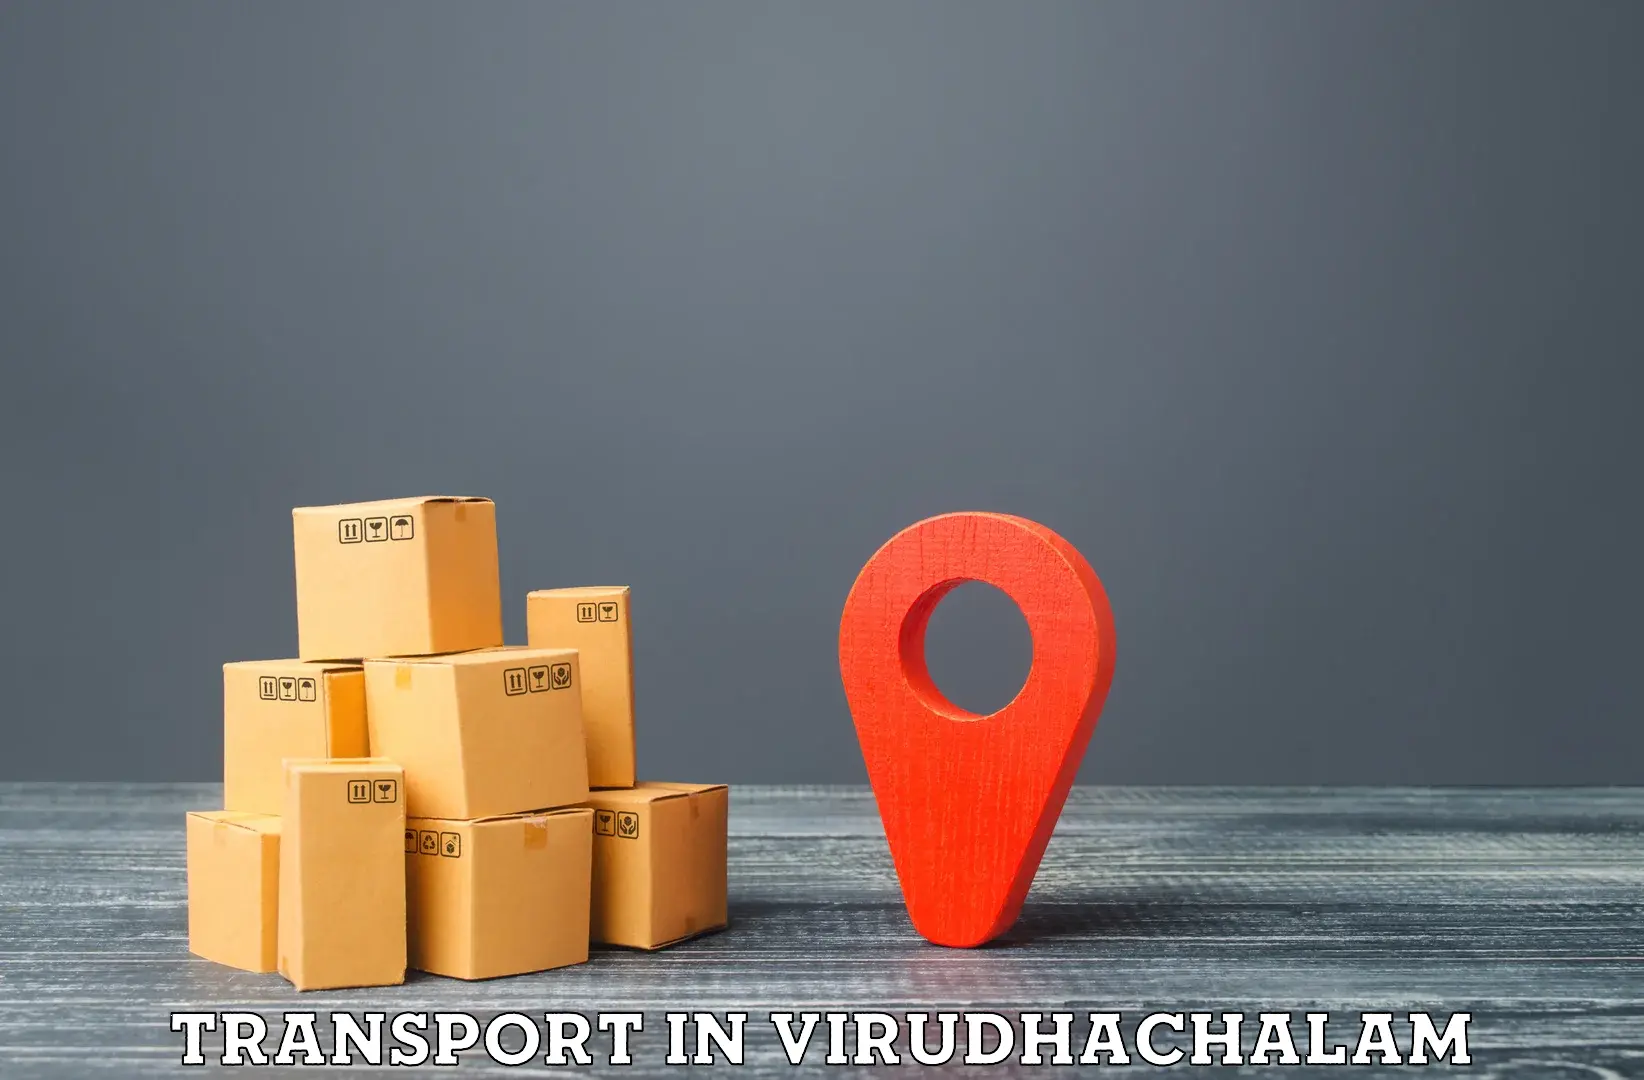 Two wheeler transport services in Virudhachalam